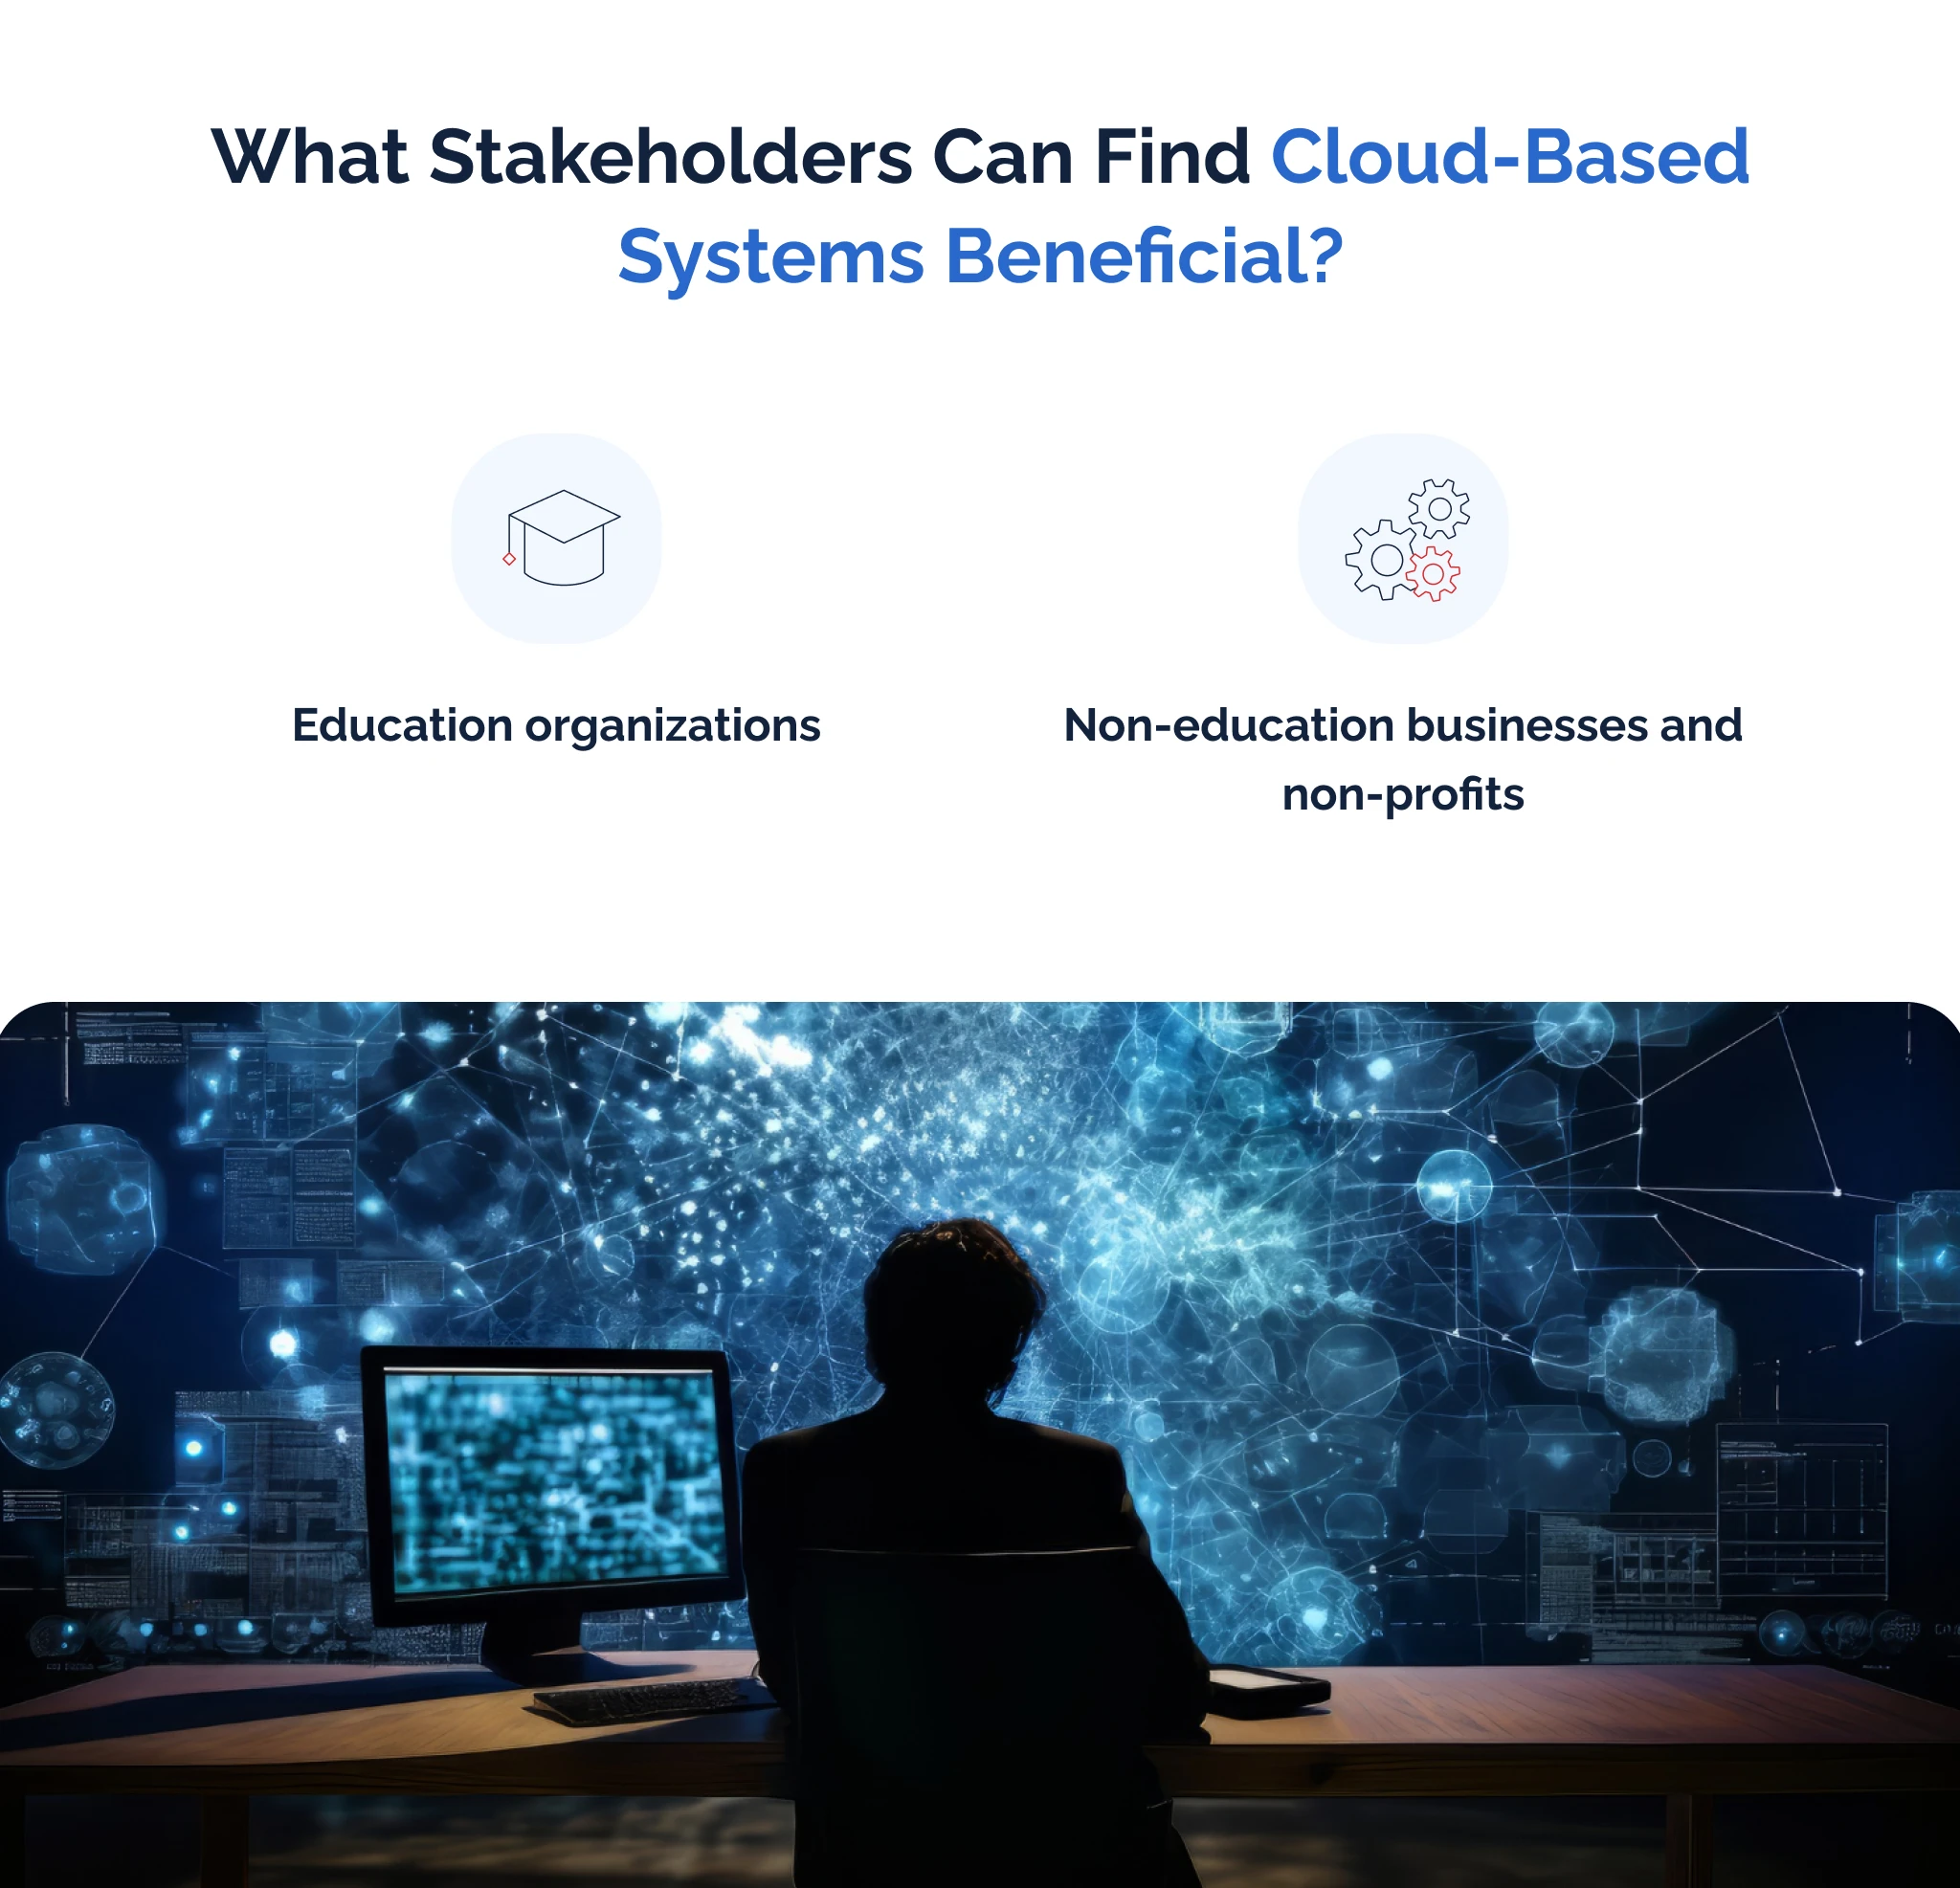 What stakeholders can find cloud-based systems beneficial?